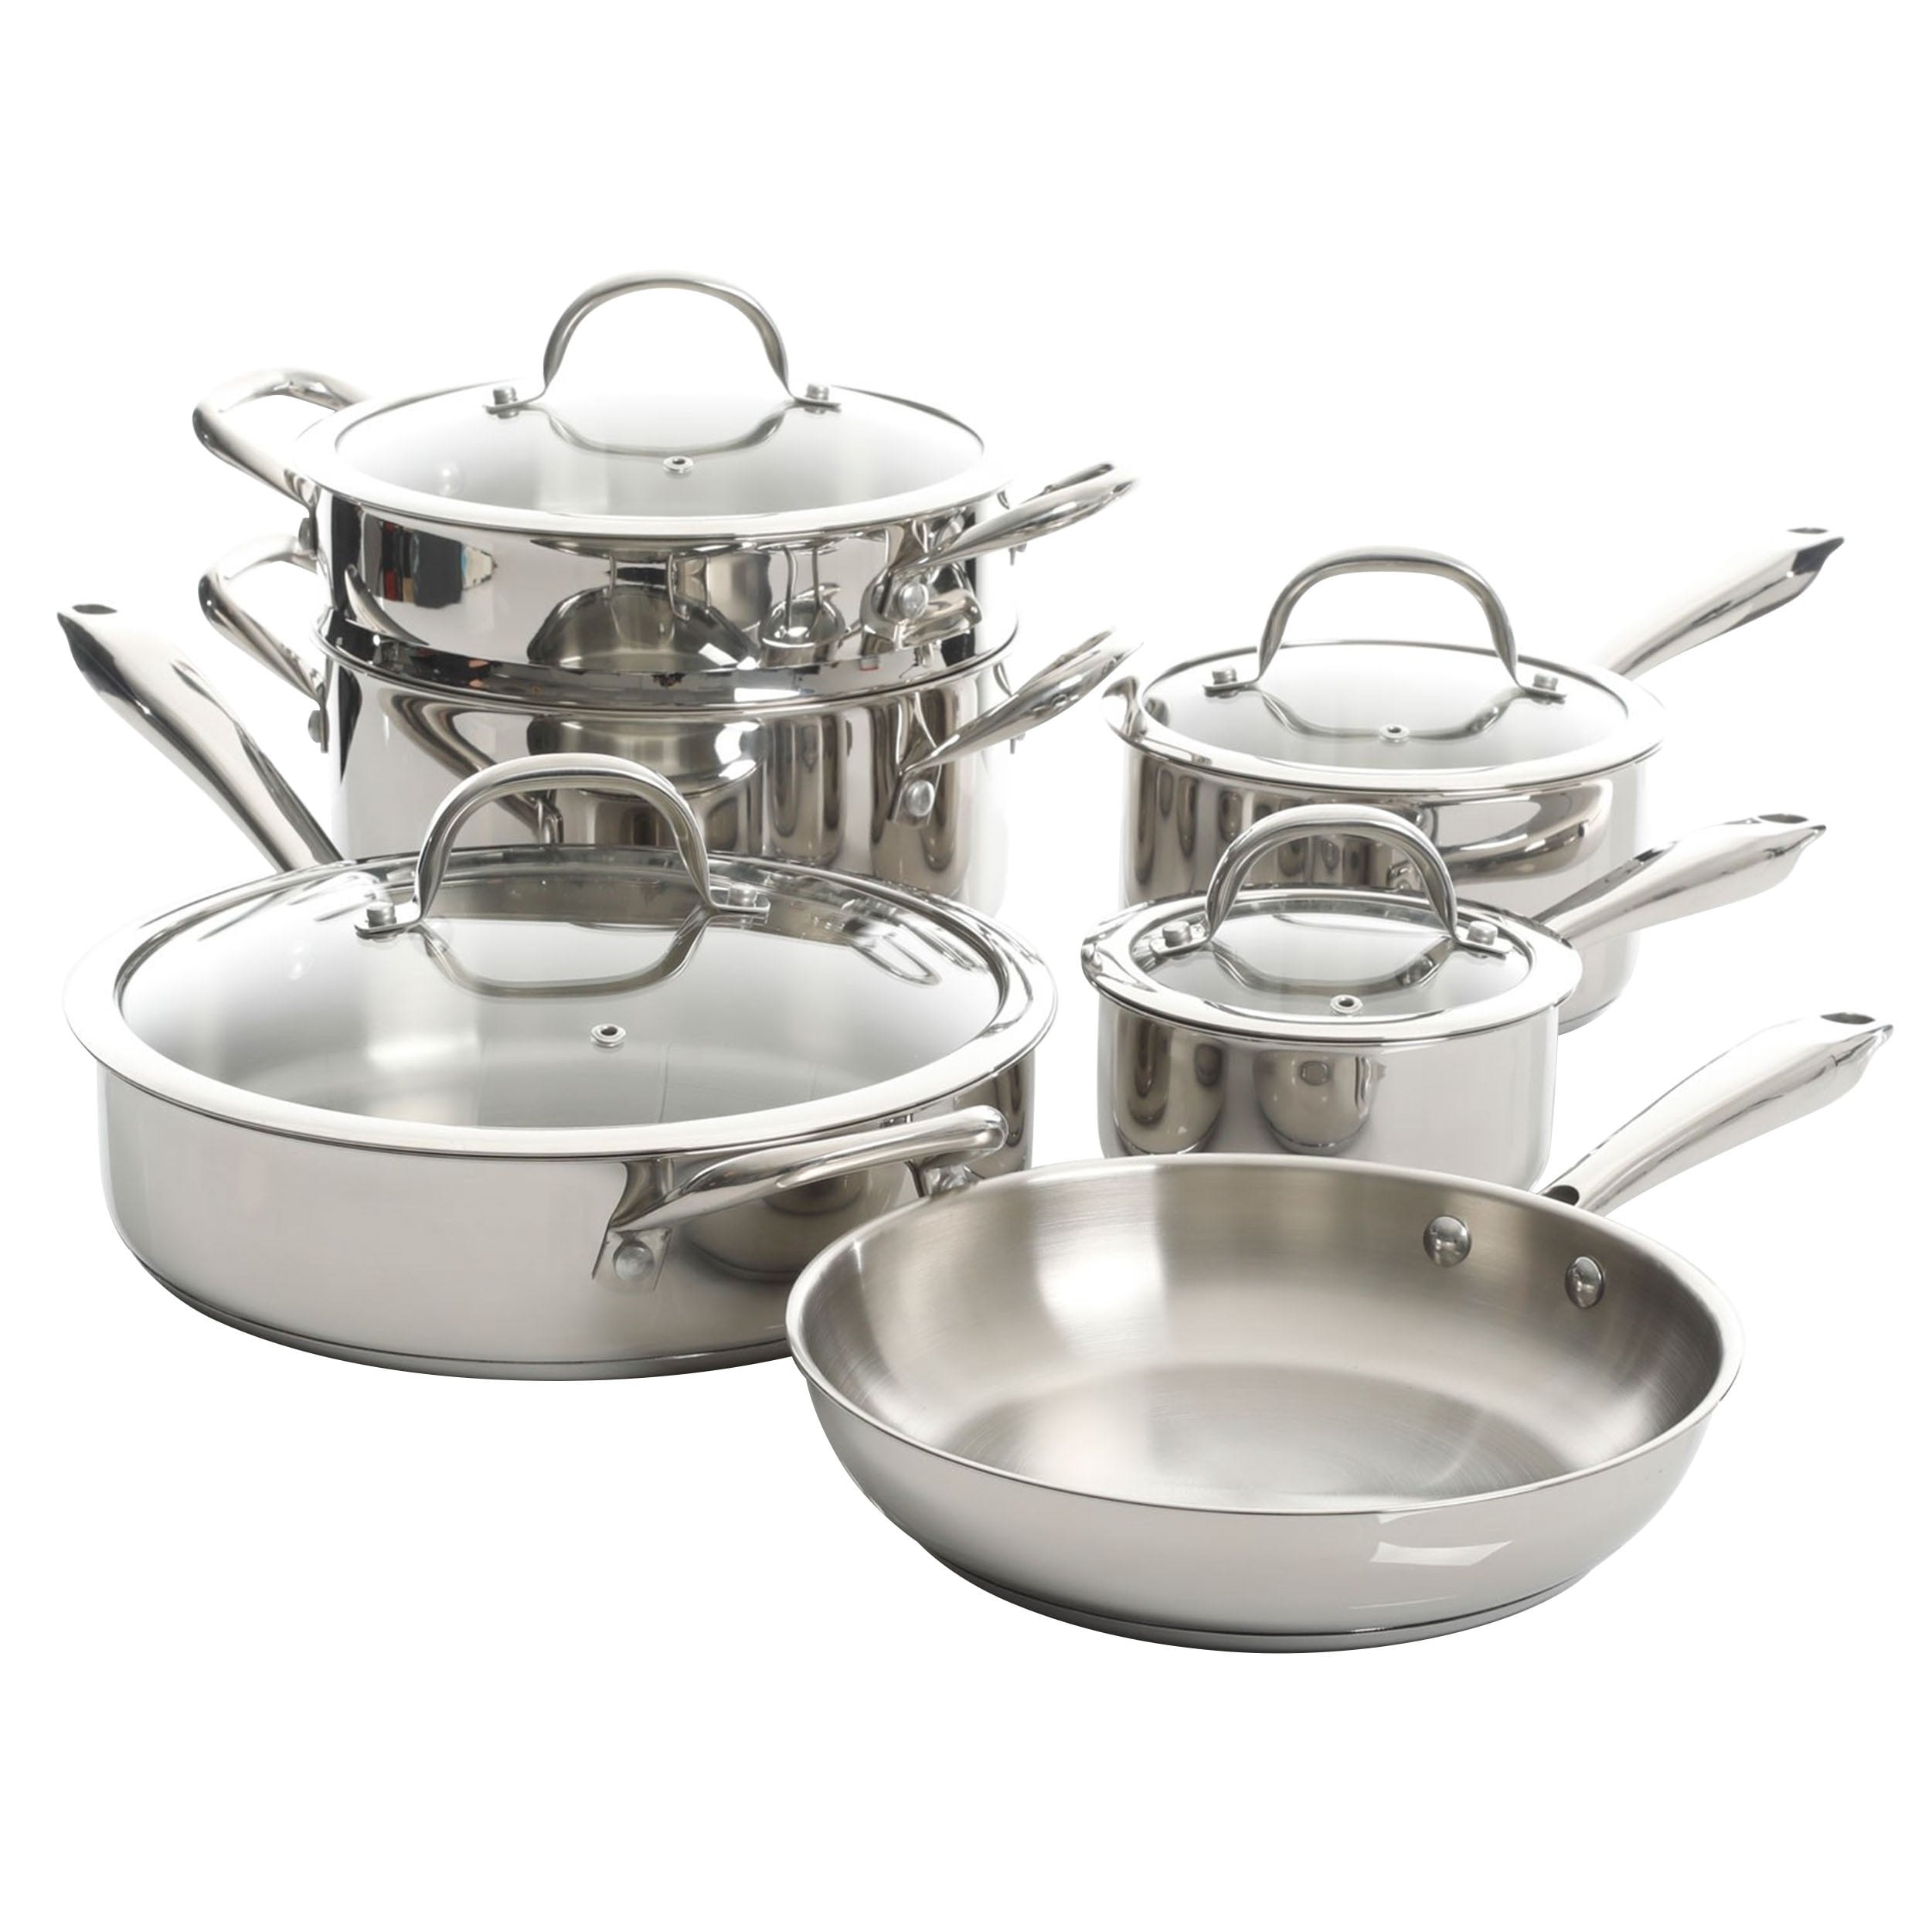 https://ak1.ostkcdn.com/images/products/is/images/direct/223e8cd24d375e0a5afe86362bf51ef4882d7062/Kenmore-Elite-Devon-10-Piece-Heavy-Gauge-Stainless-Steel-Cookware-Set.jpg